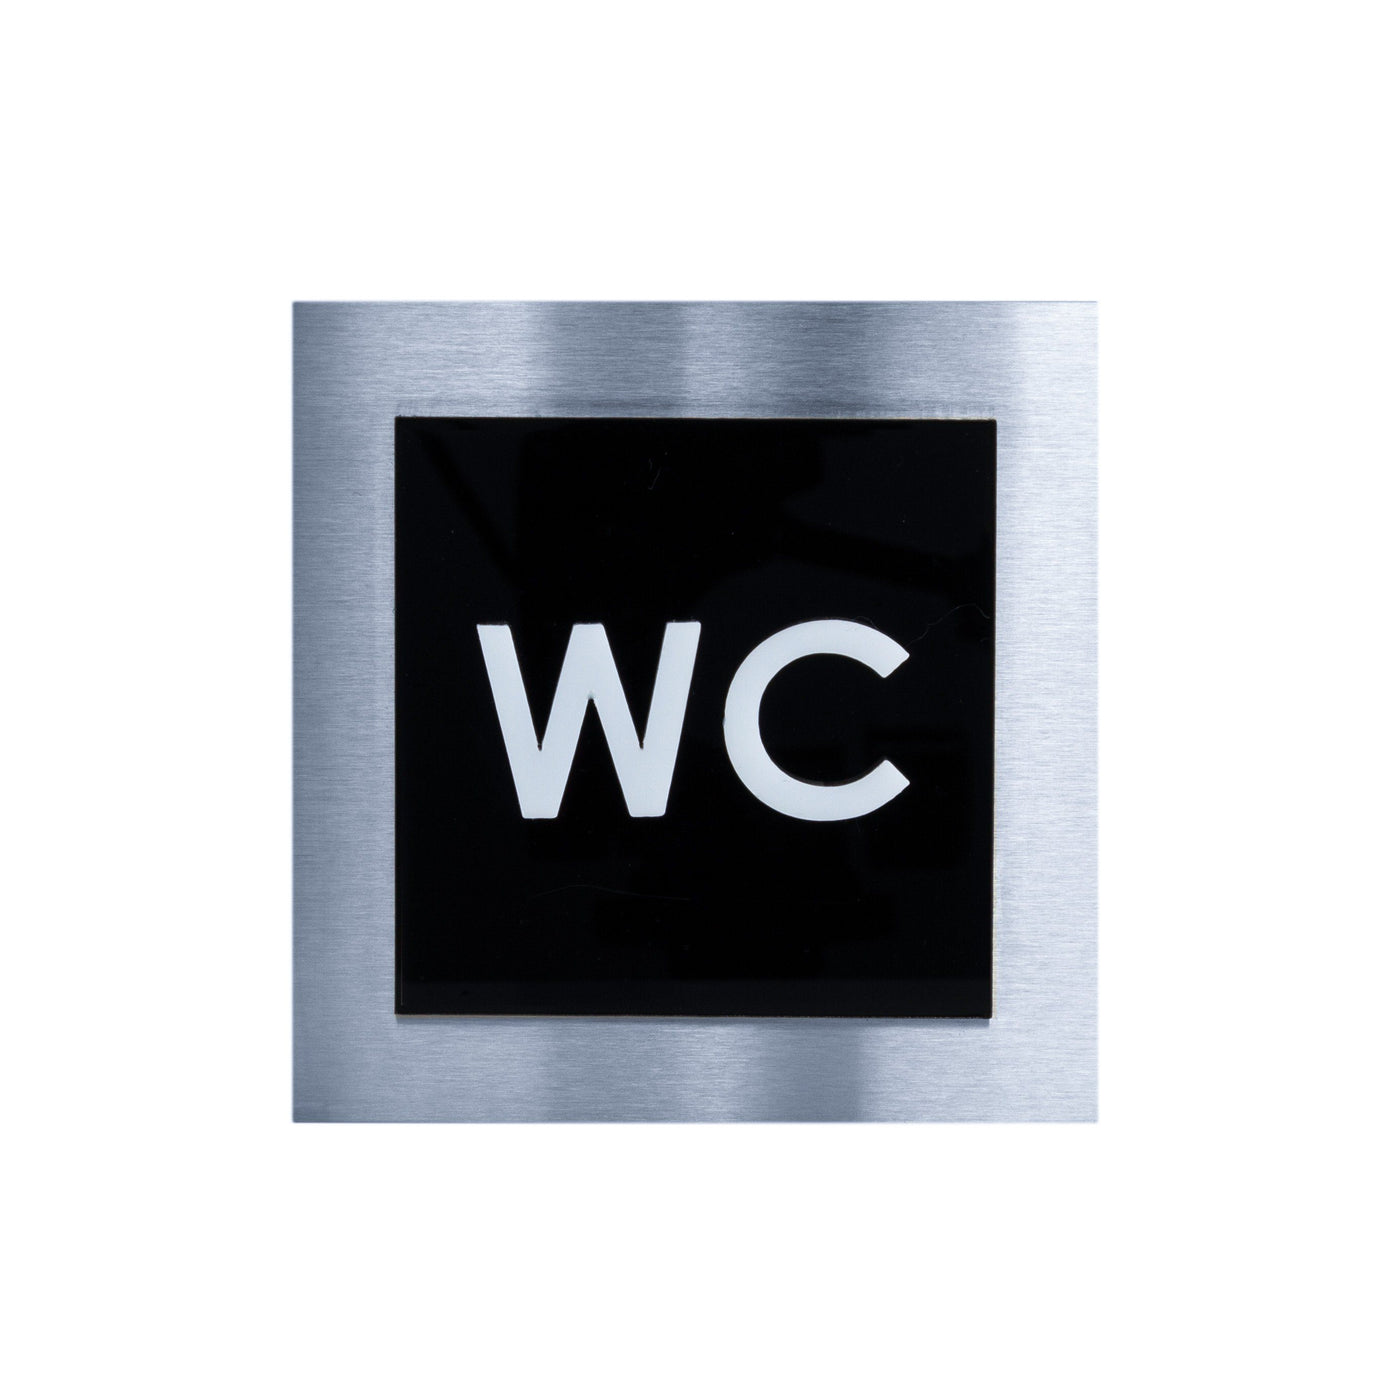 Steel WC Sign for Bathroom Bathroom Signs black / white letters Bsign